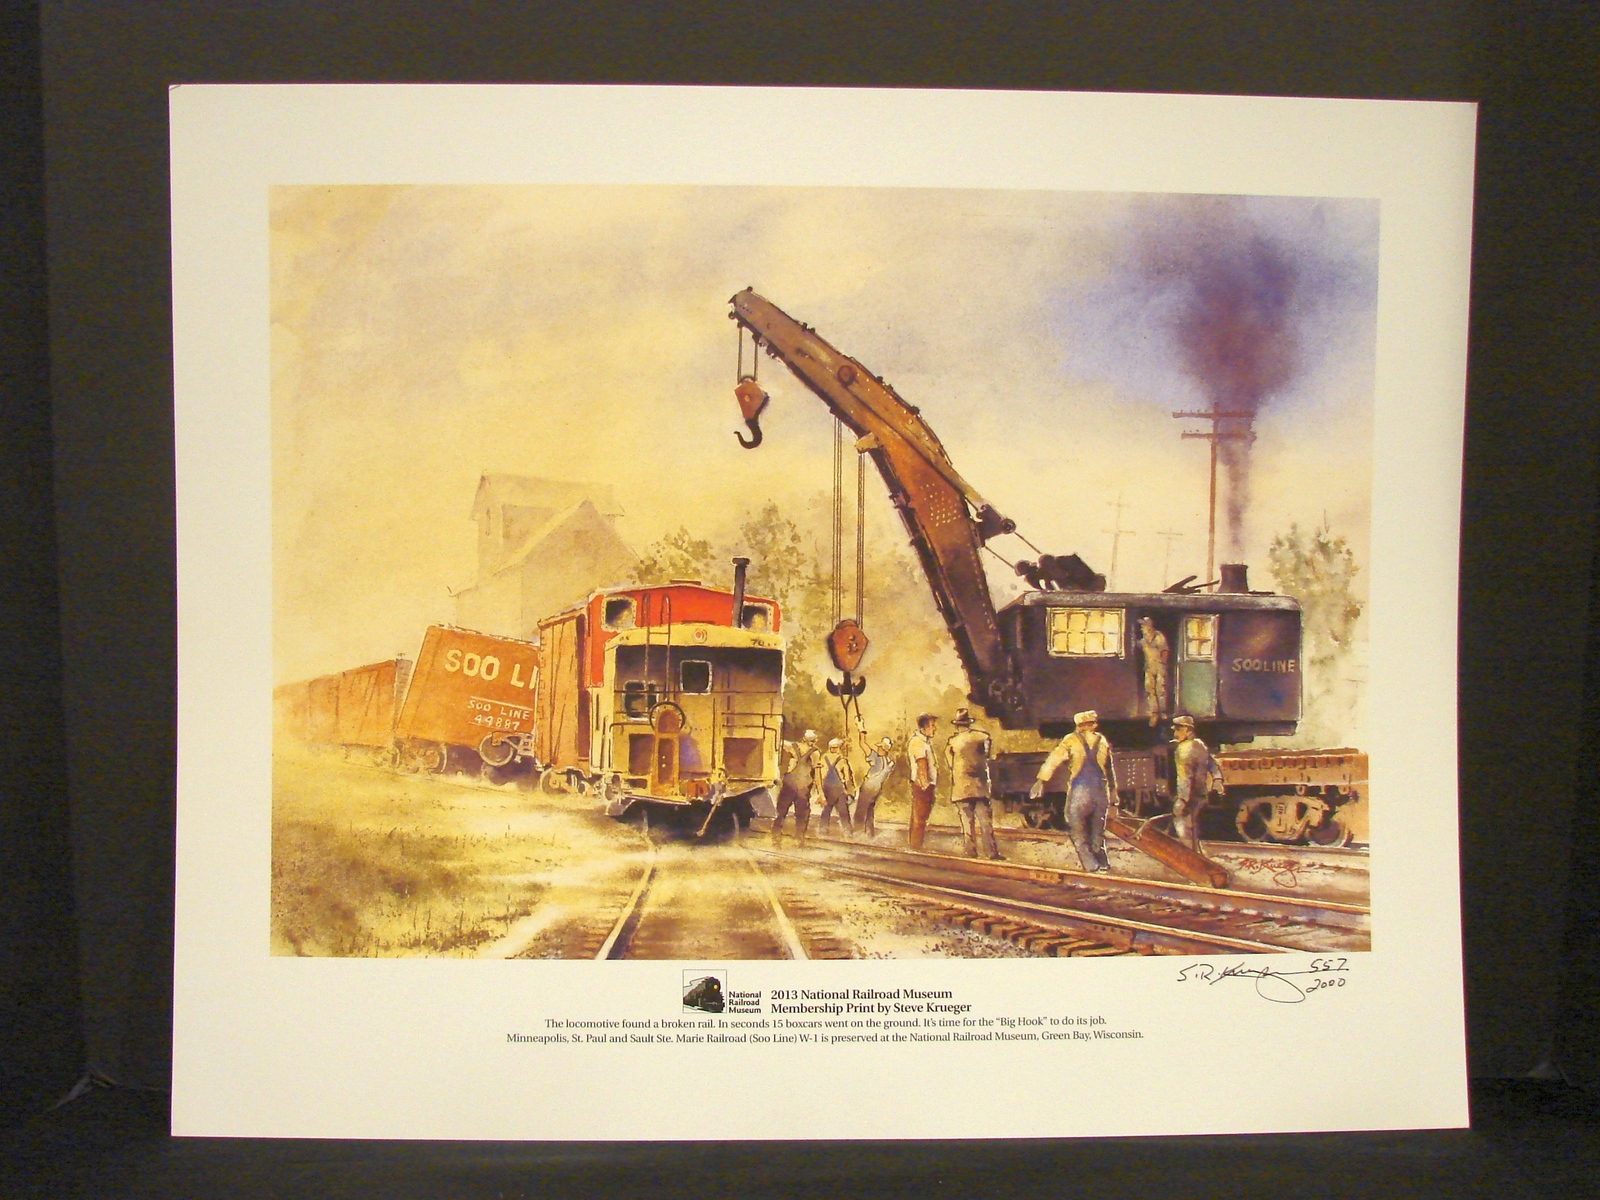 National Railroad Museum Signed , Numbered Print (2013 ) by Steve Krueger - $19.99